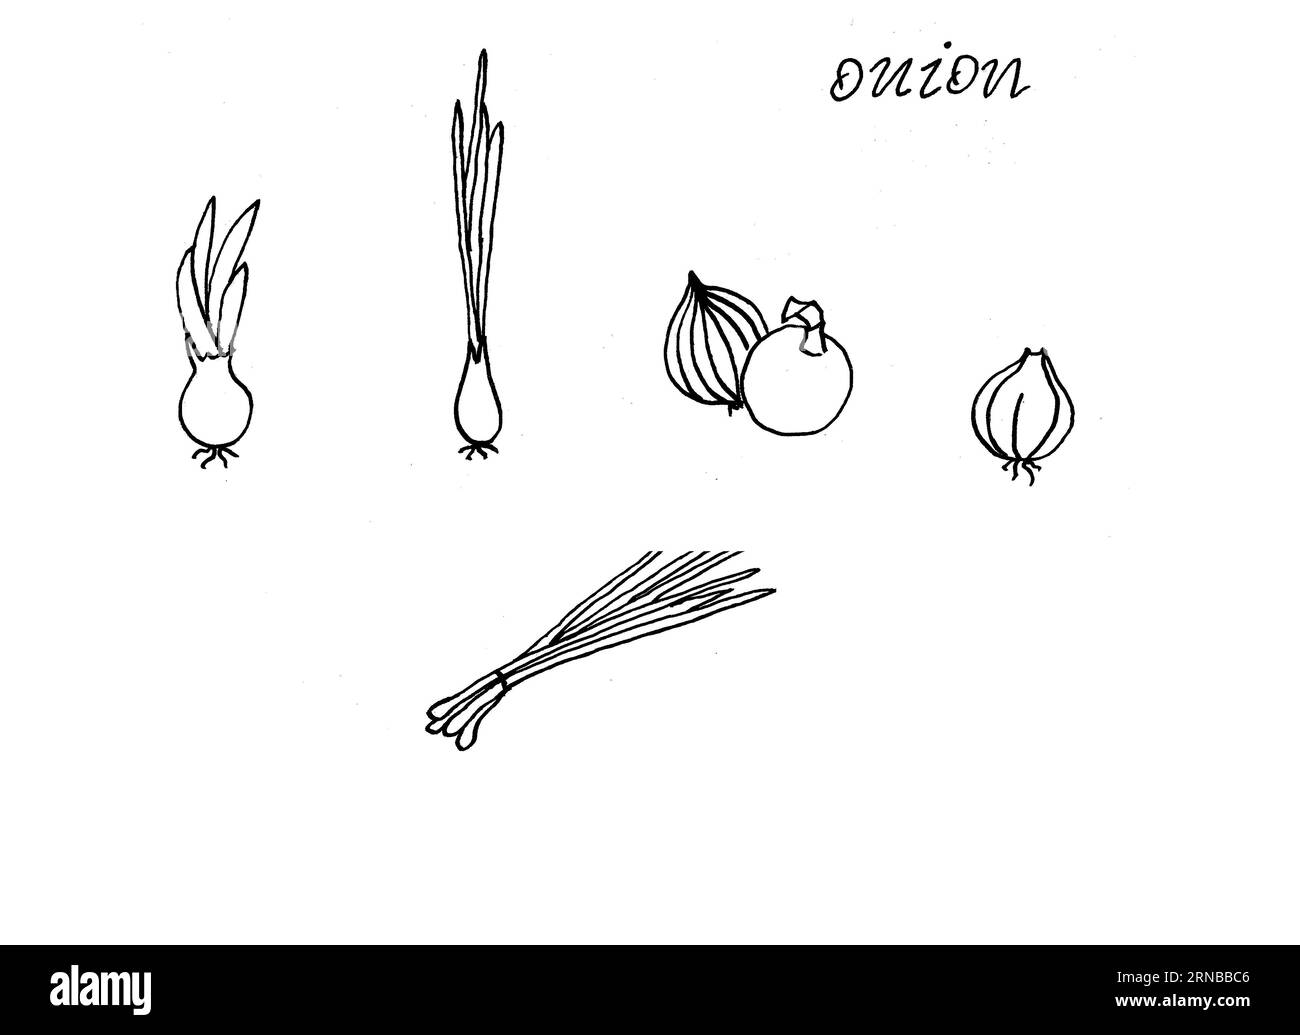 Onion. Vector drawing stock vector. Illustration of botany - 76862911